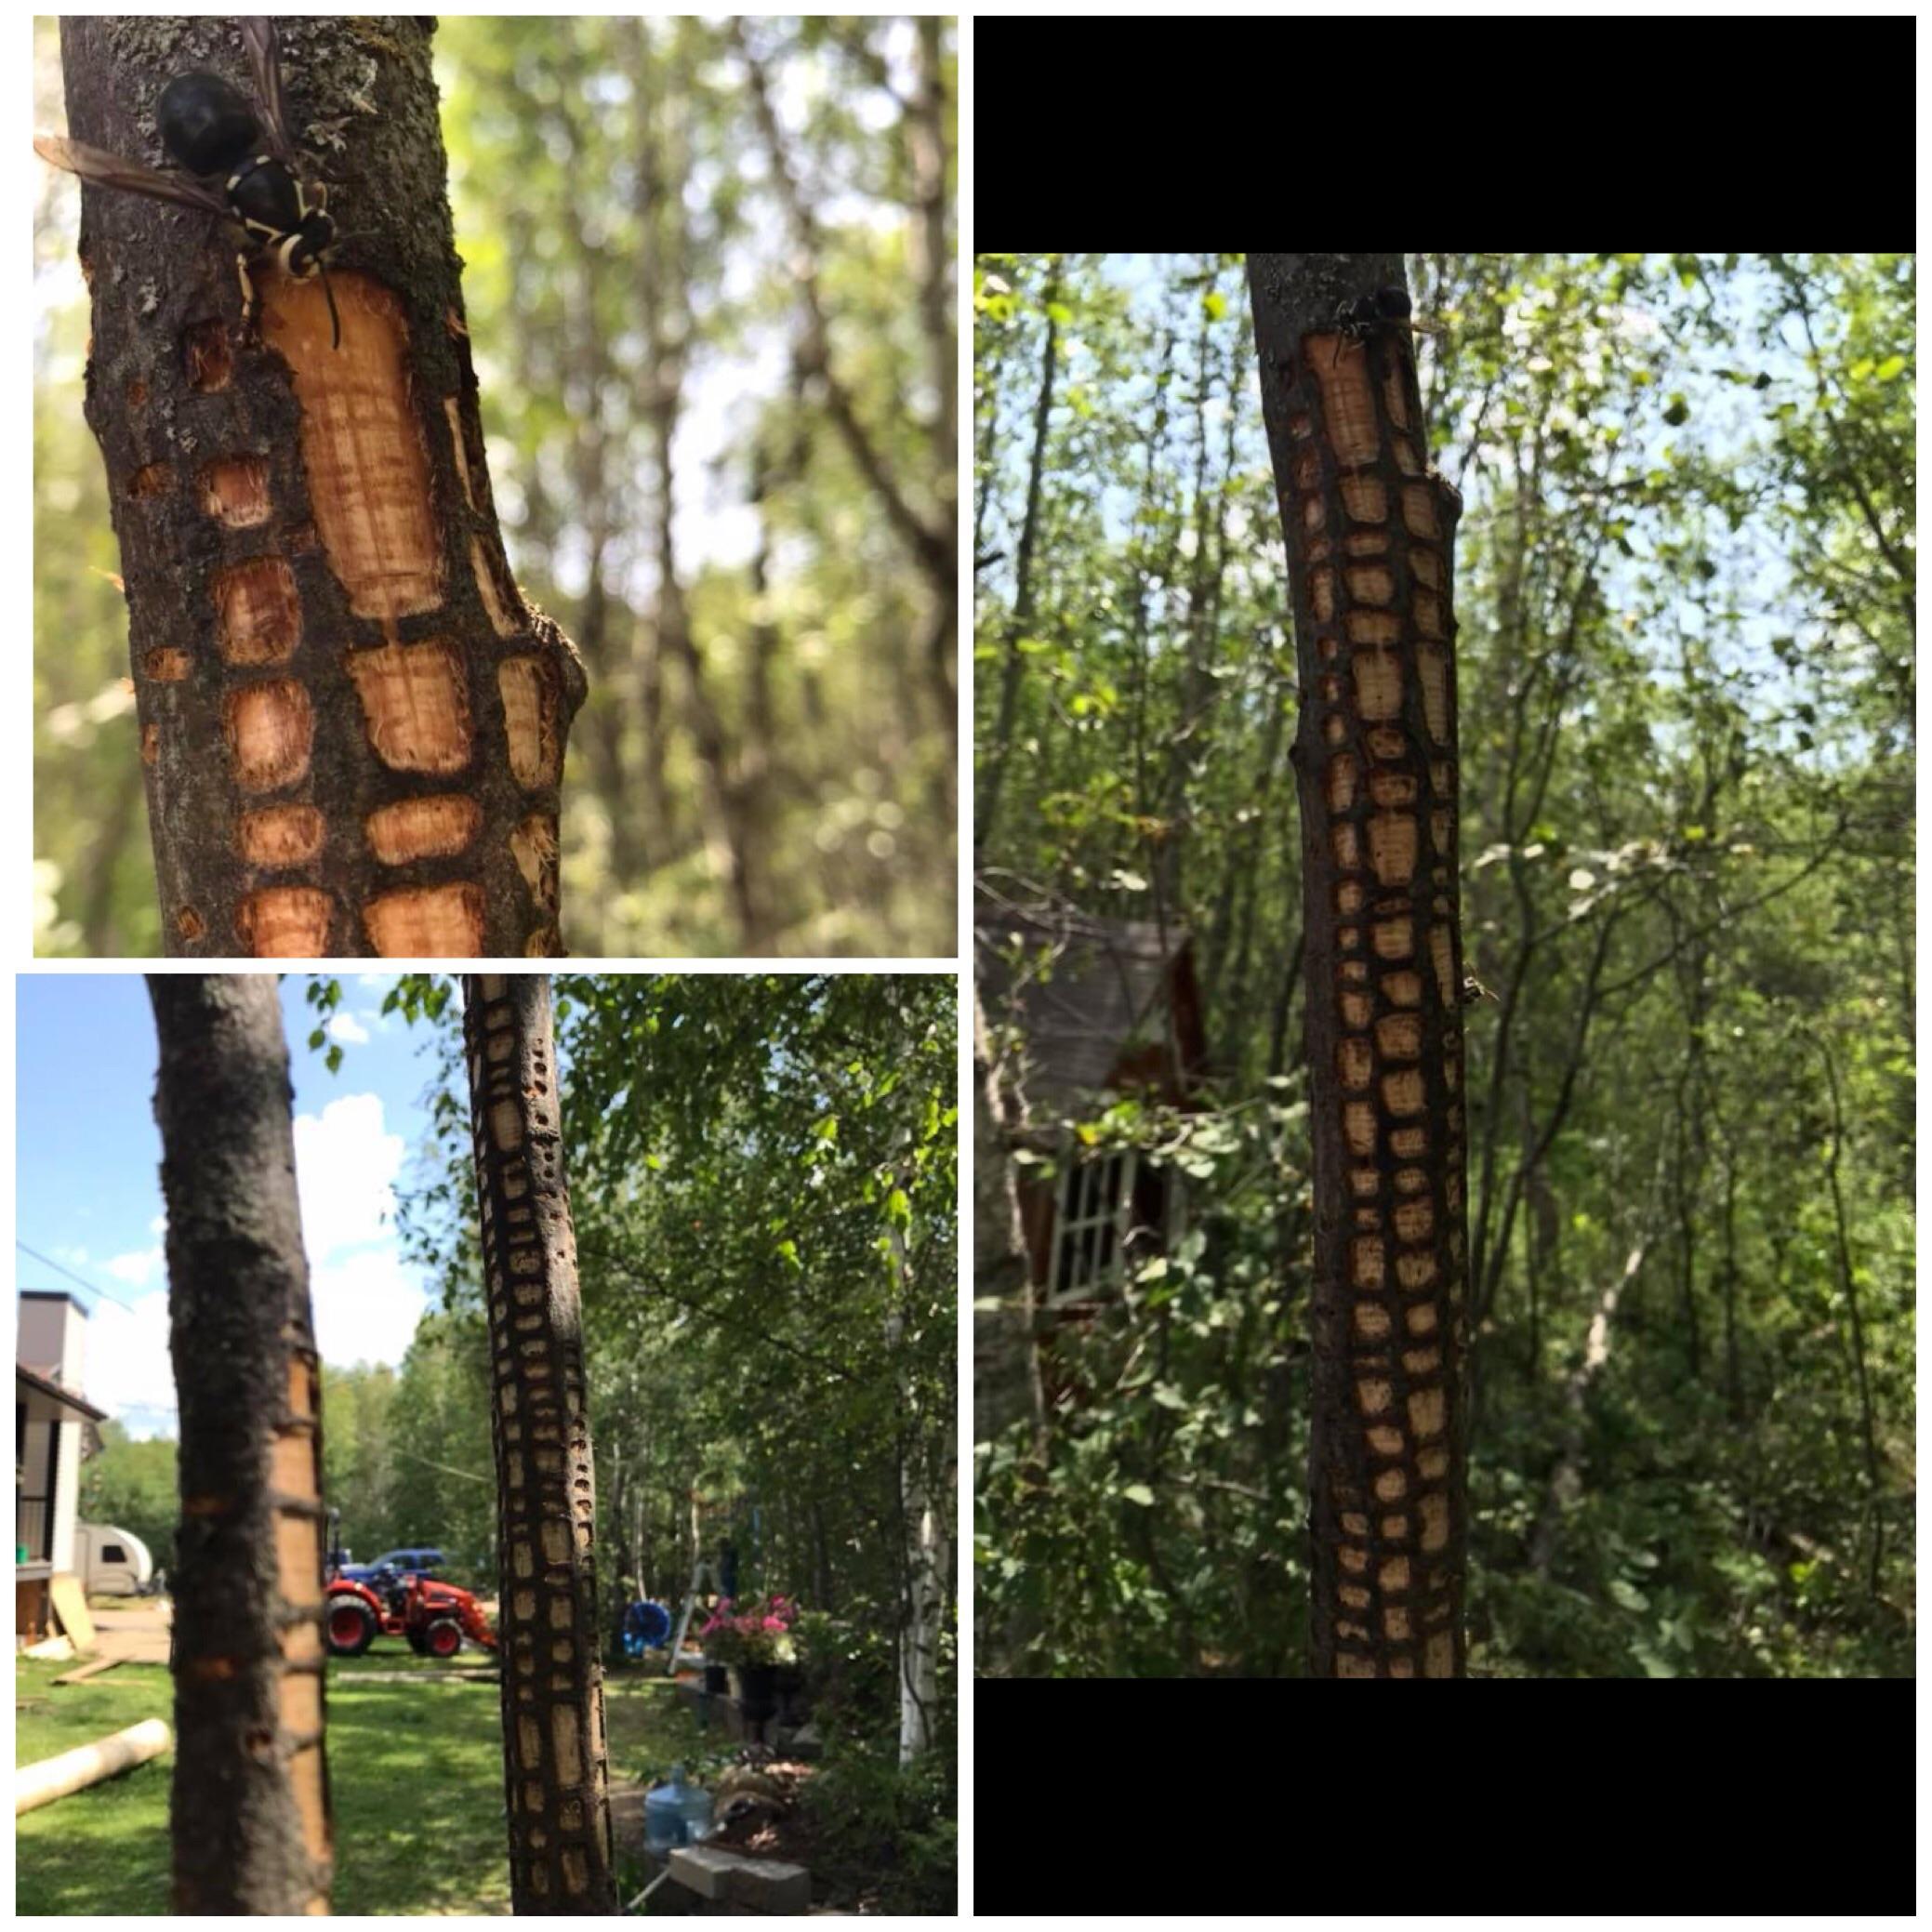 The pattern this wasp peels the bark off a tree.